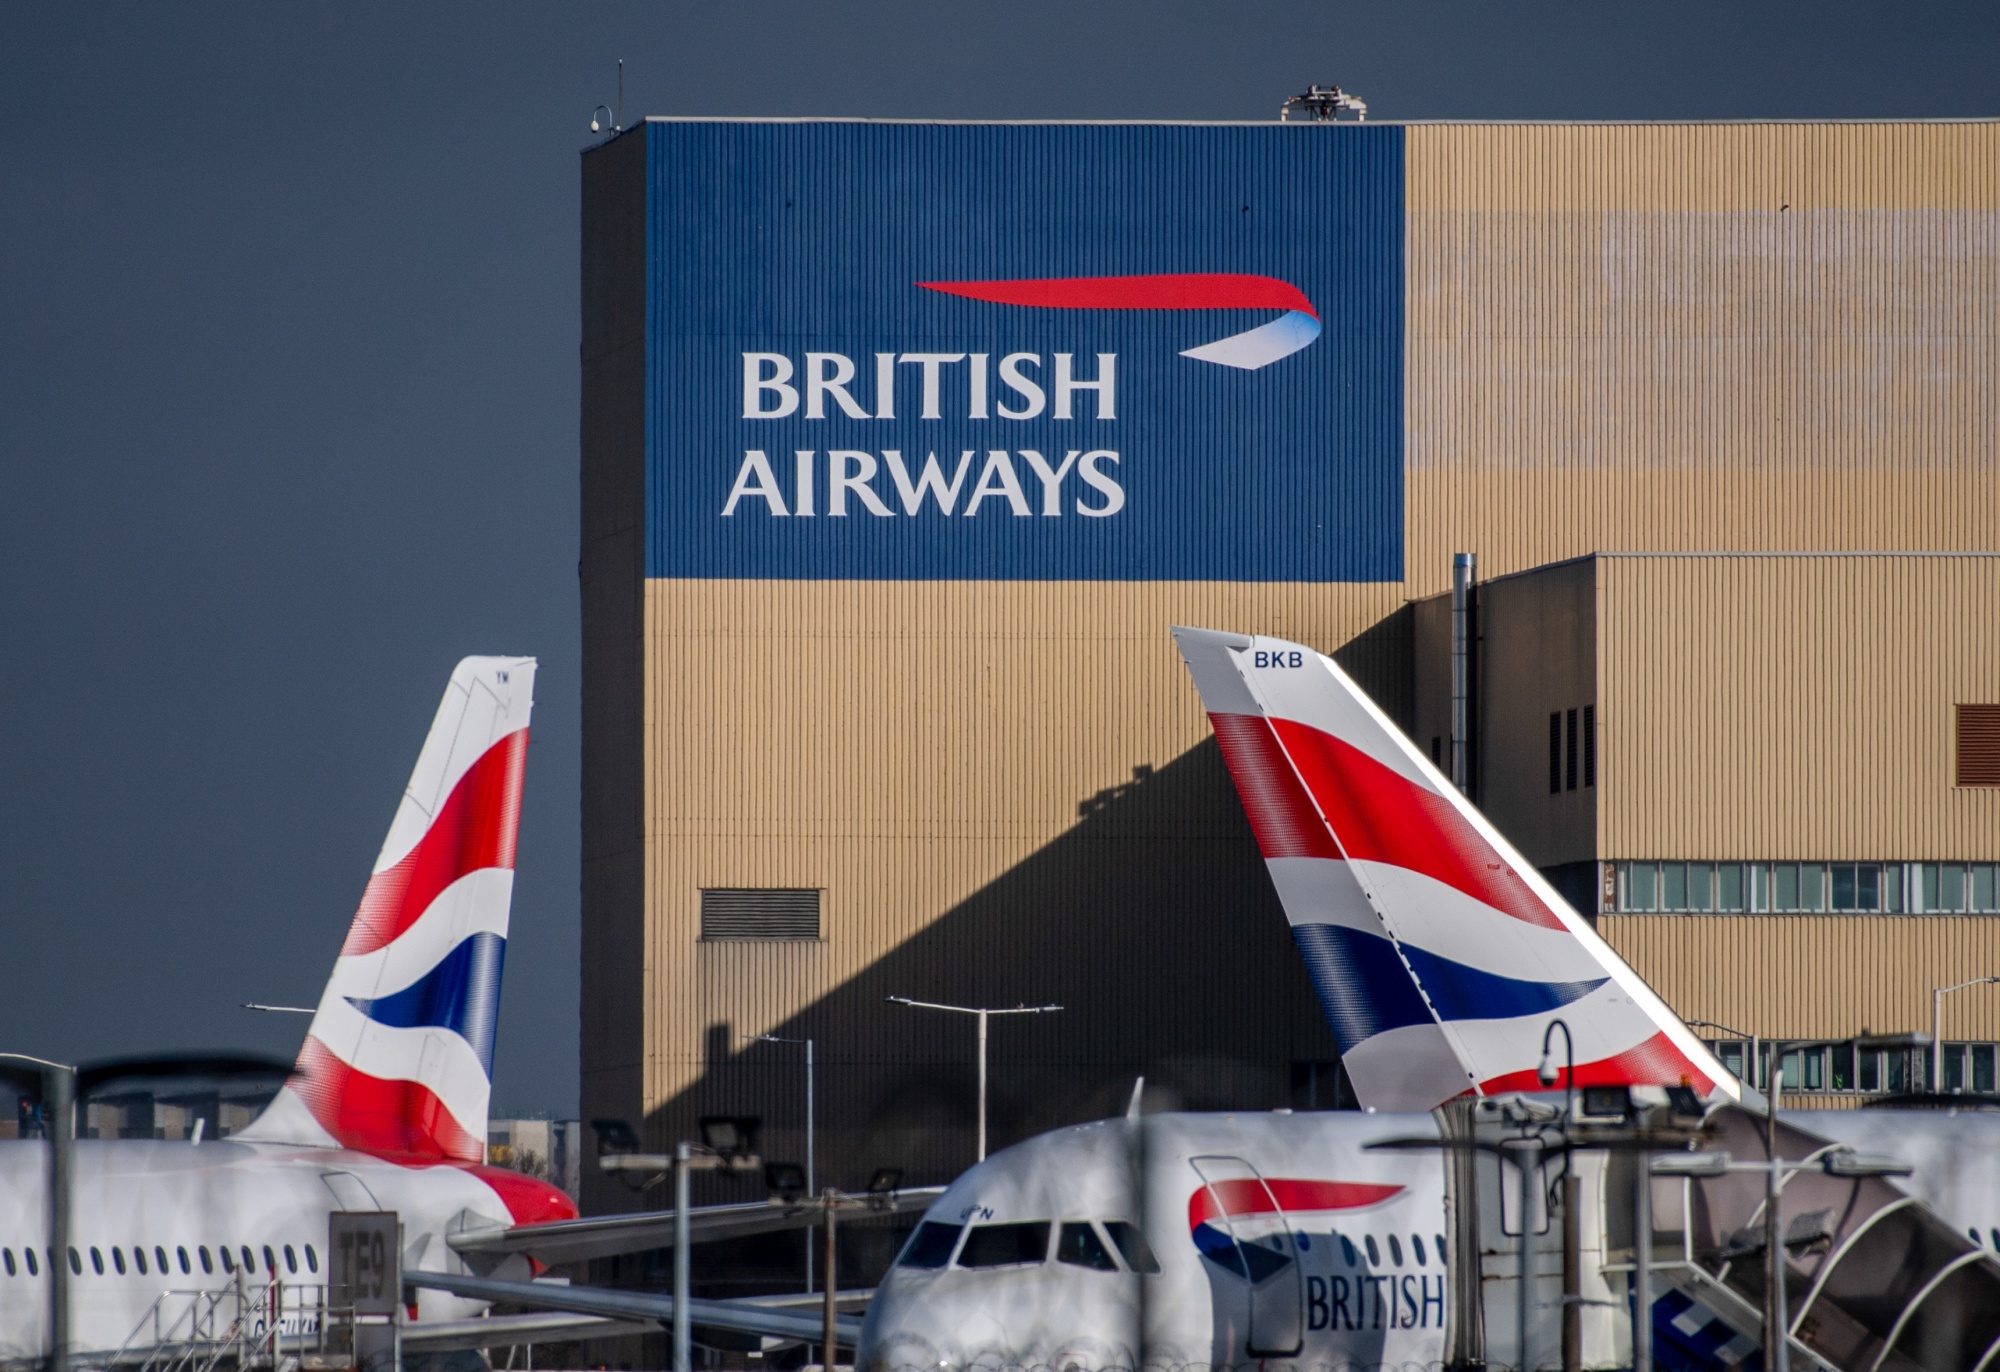 BA Stops Selling Short-Haul Flights Out of London Heathrow for a Week